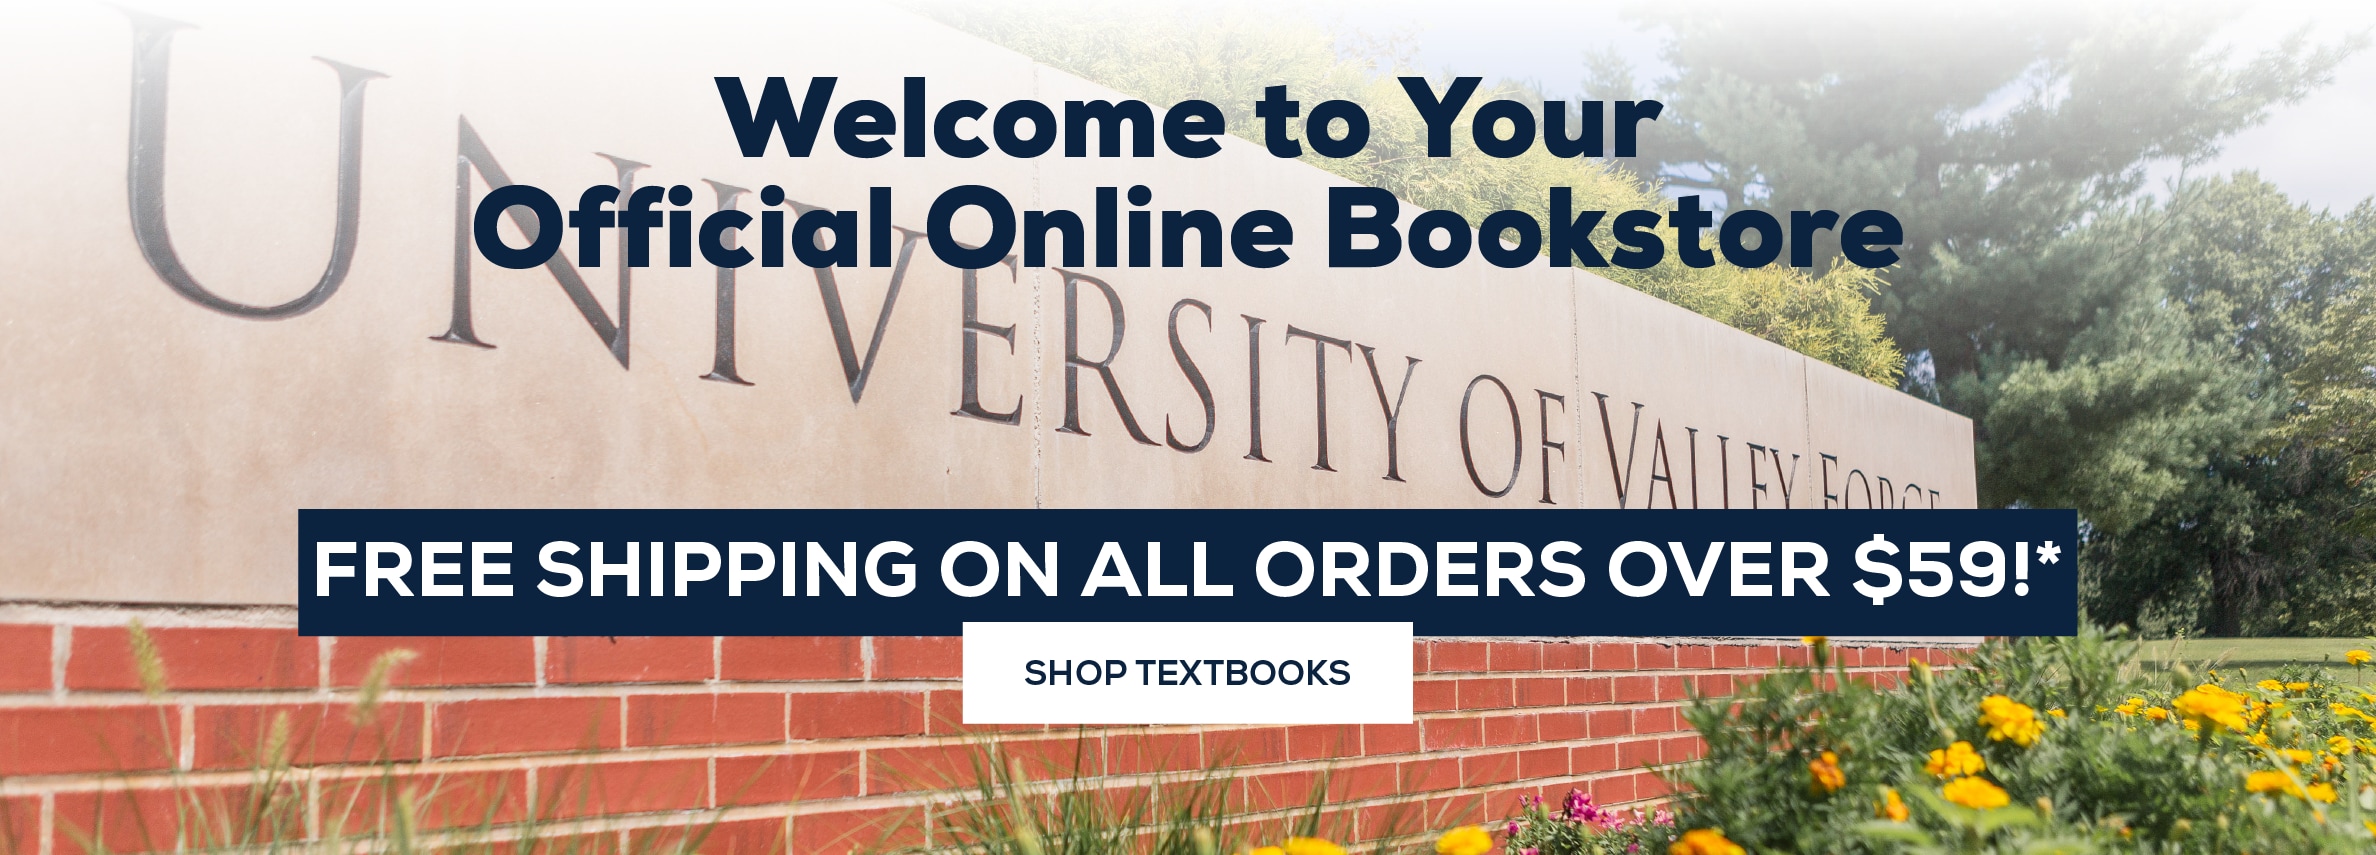 Welcome to Your Official Online Bookstore. FREE SHIPPING ON ALL ORDERS OVER $59!* SHOP TEXTBOOKS